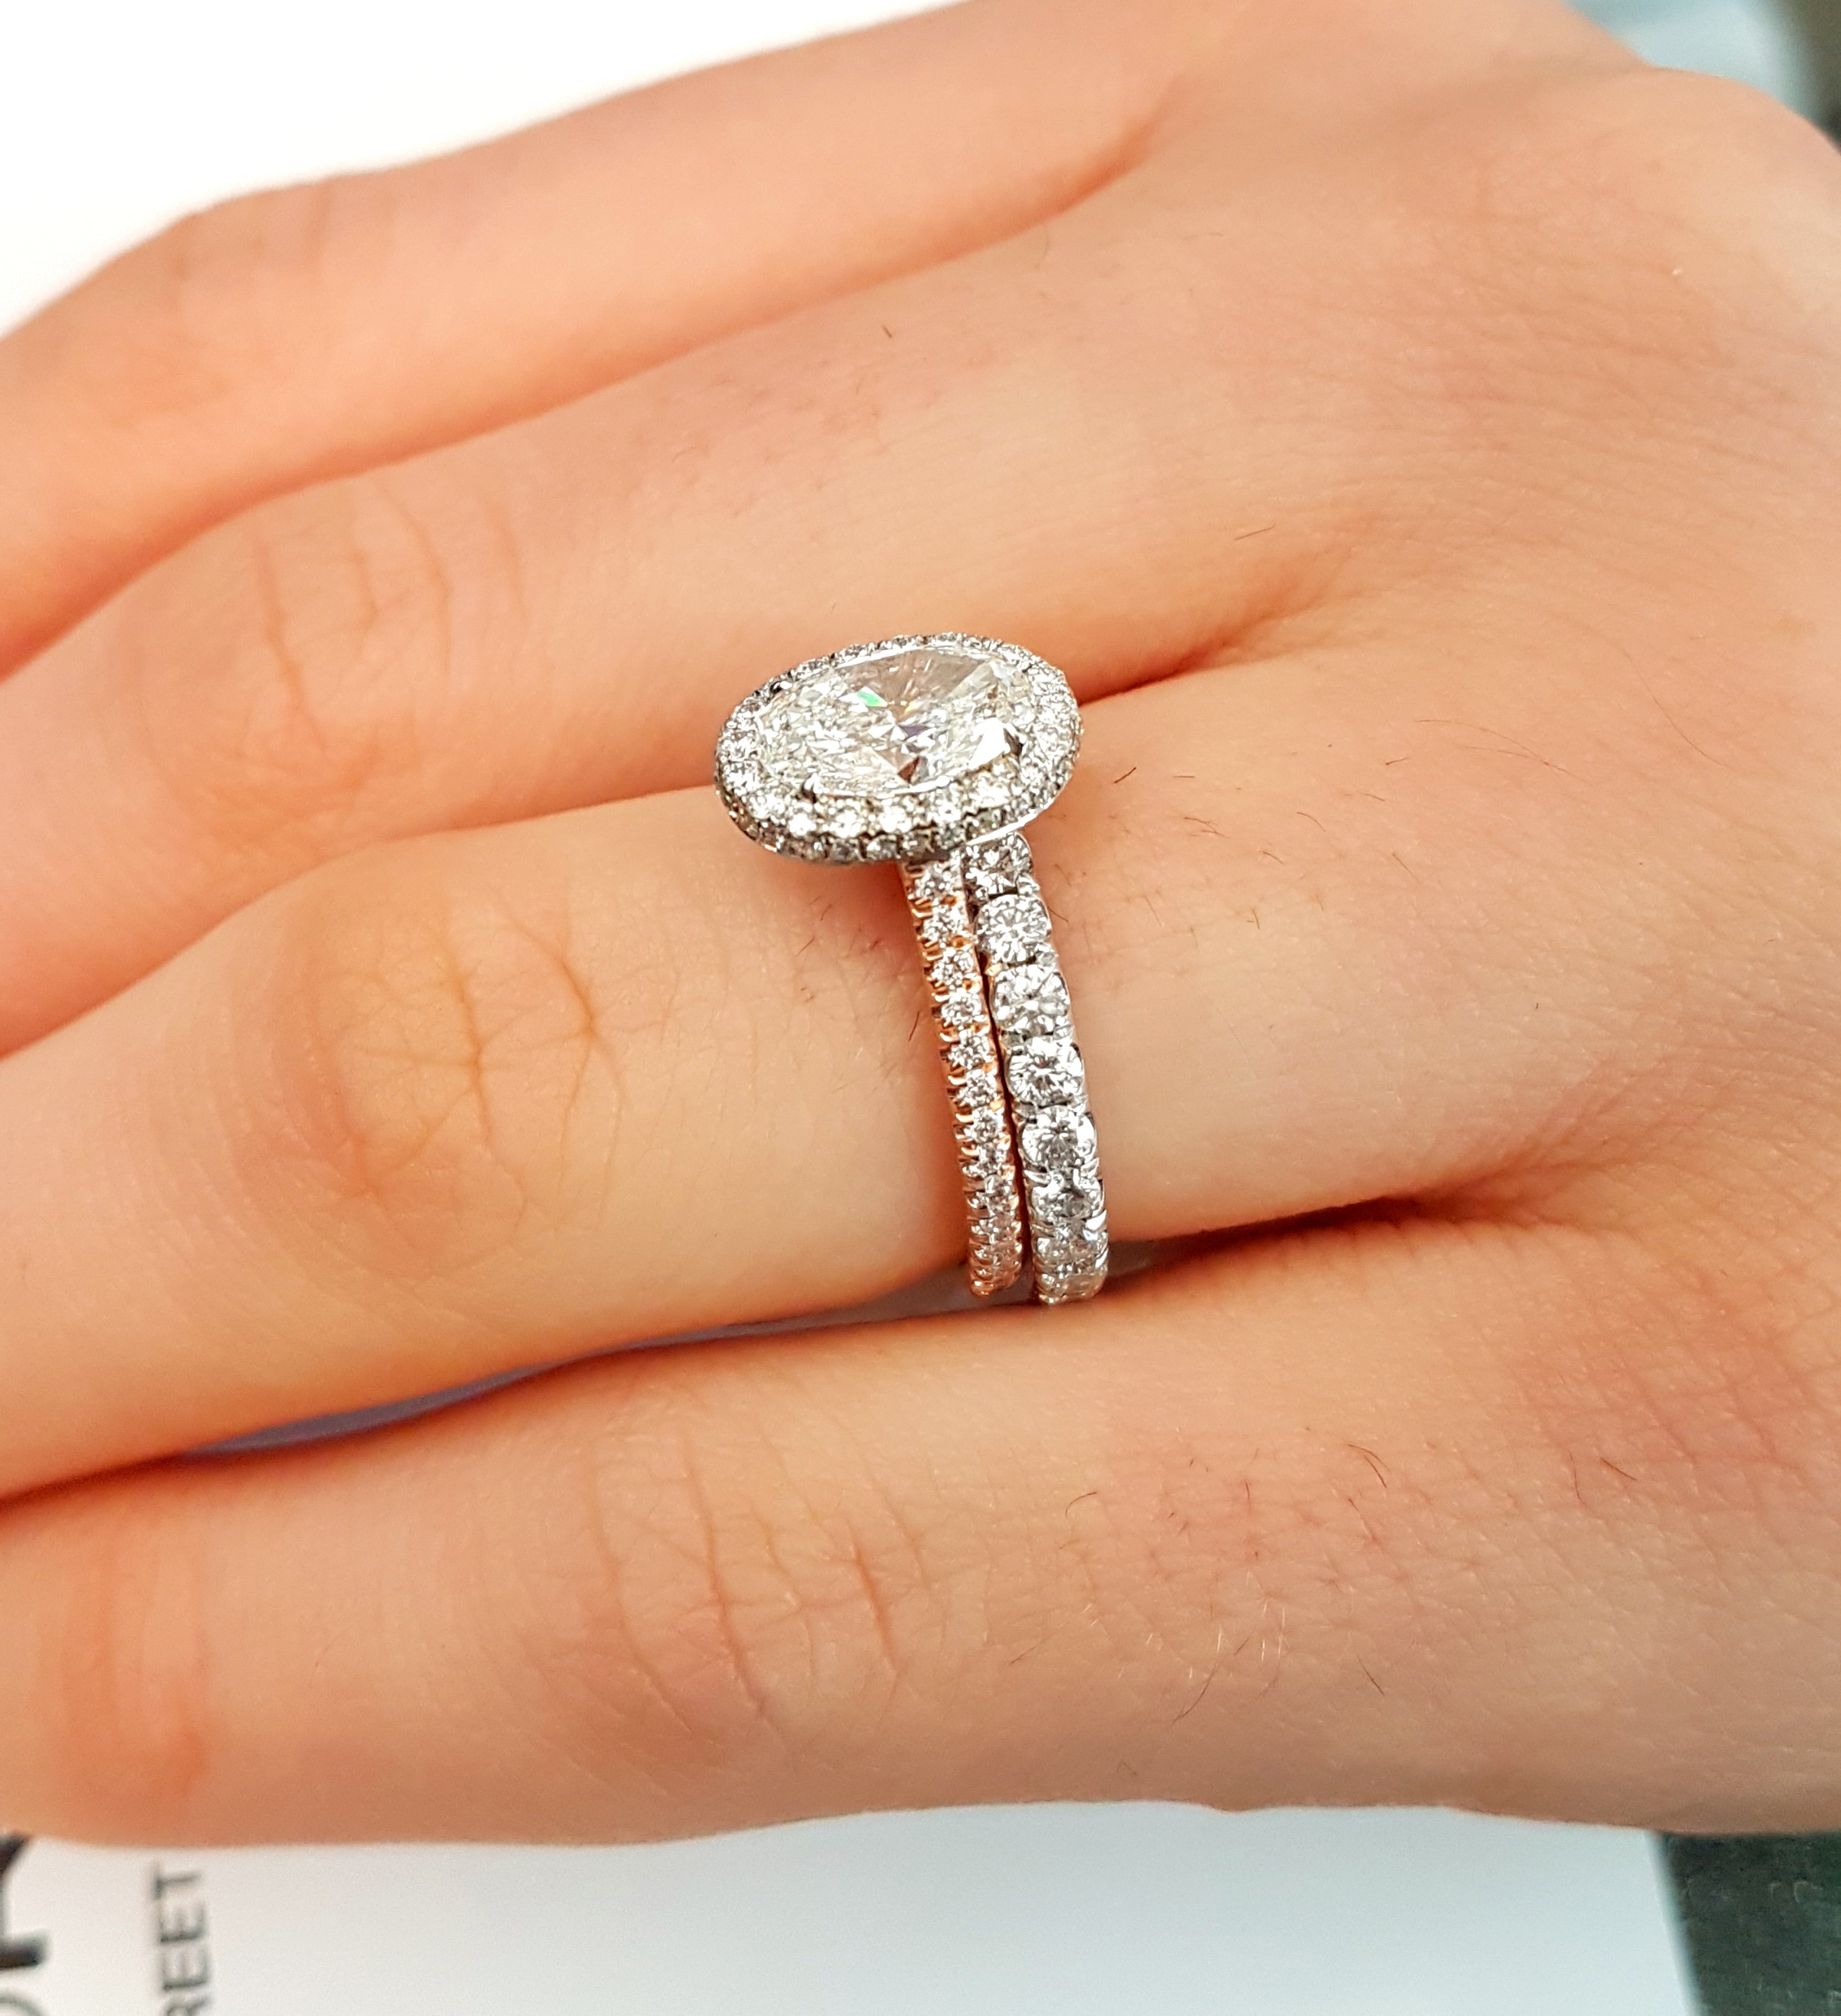 Ring Size: Why The Perfect Fit Is Important